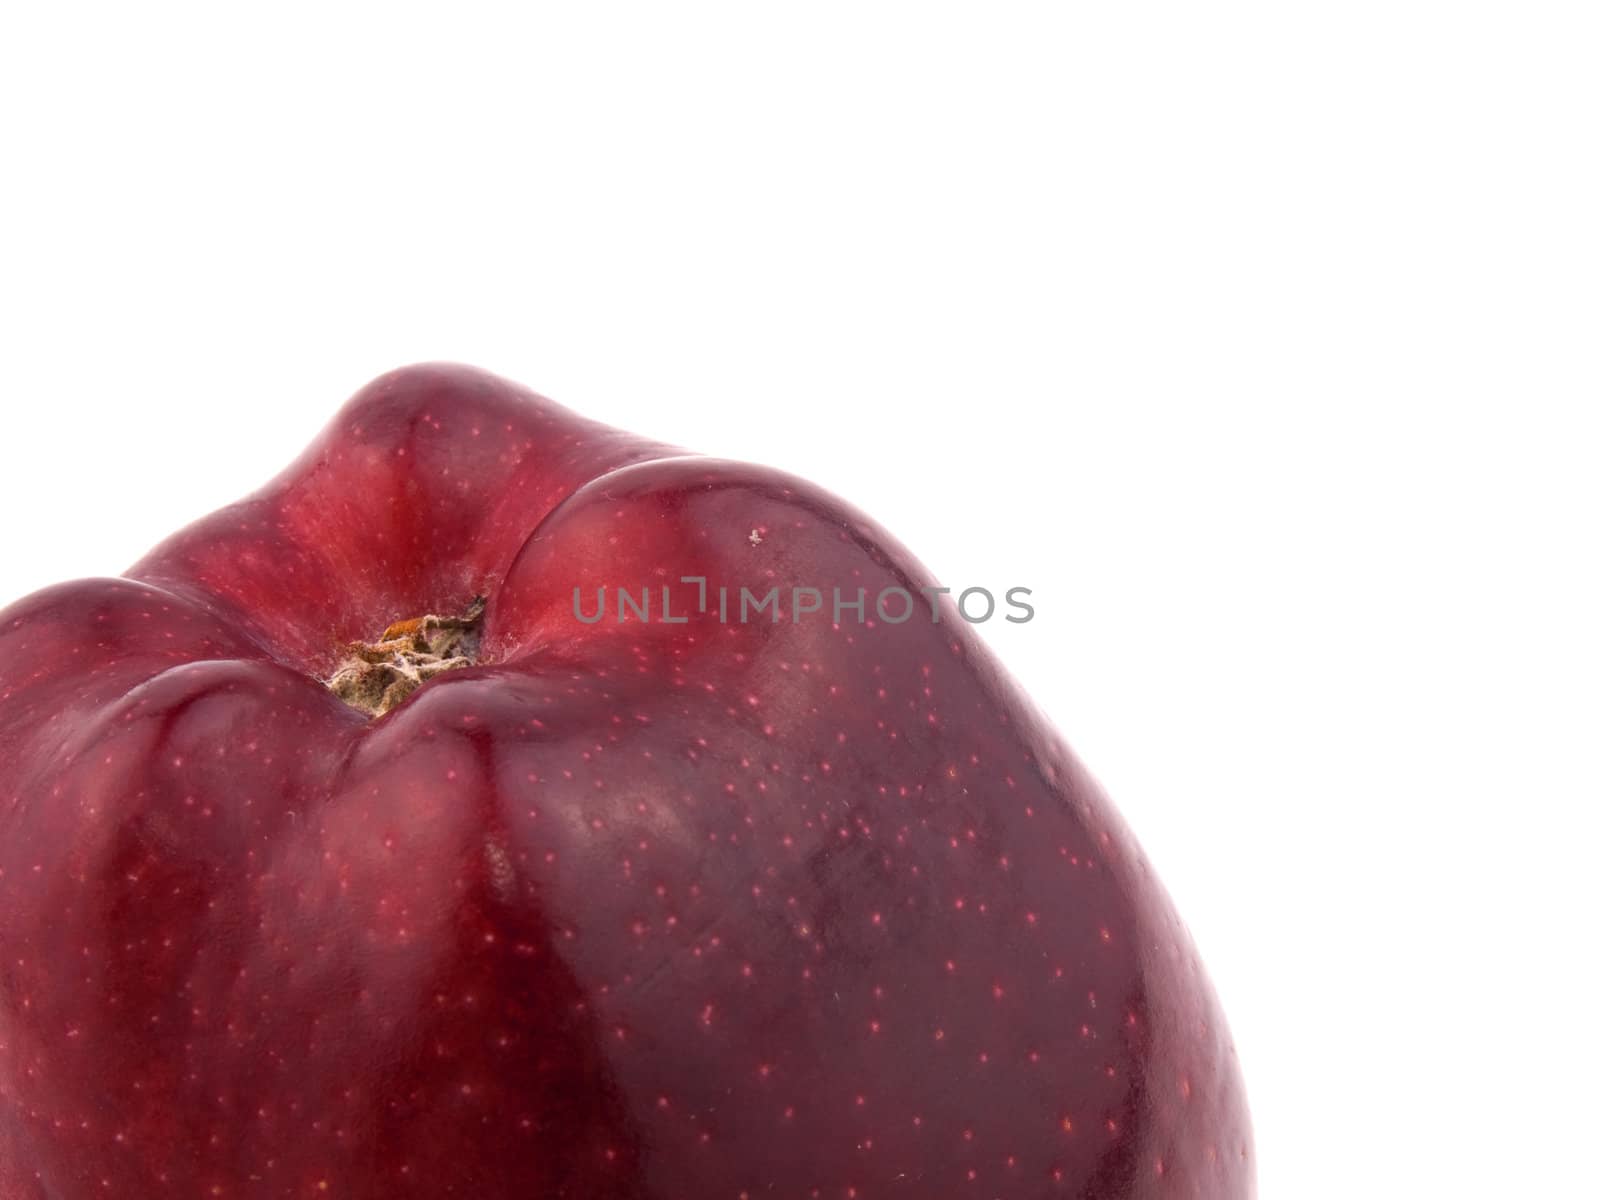 Closeup picture of tasty red apple on white background